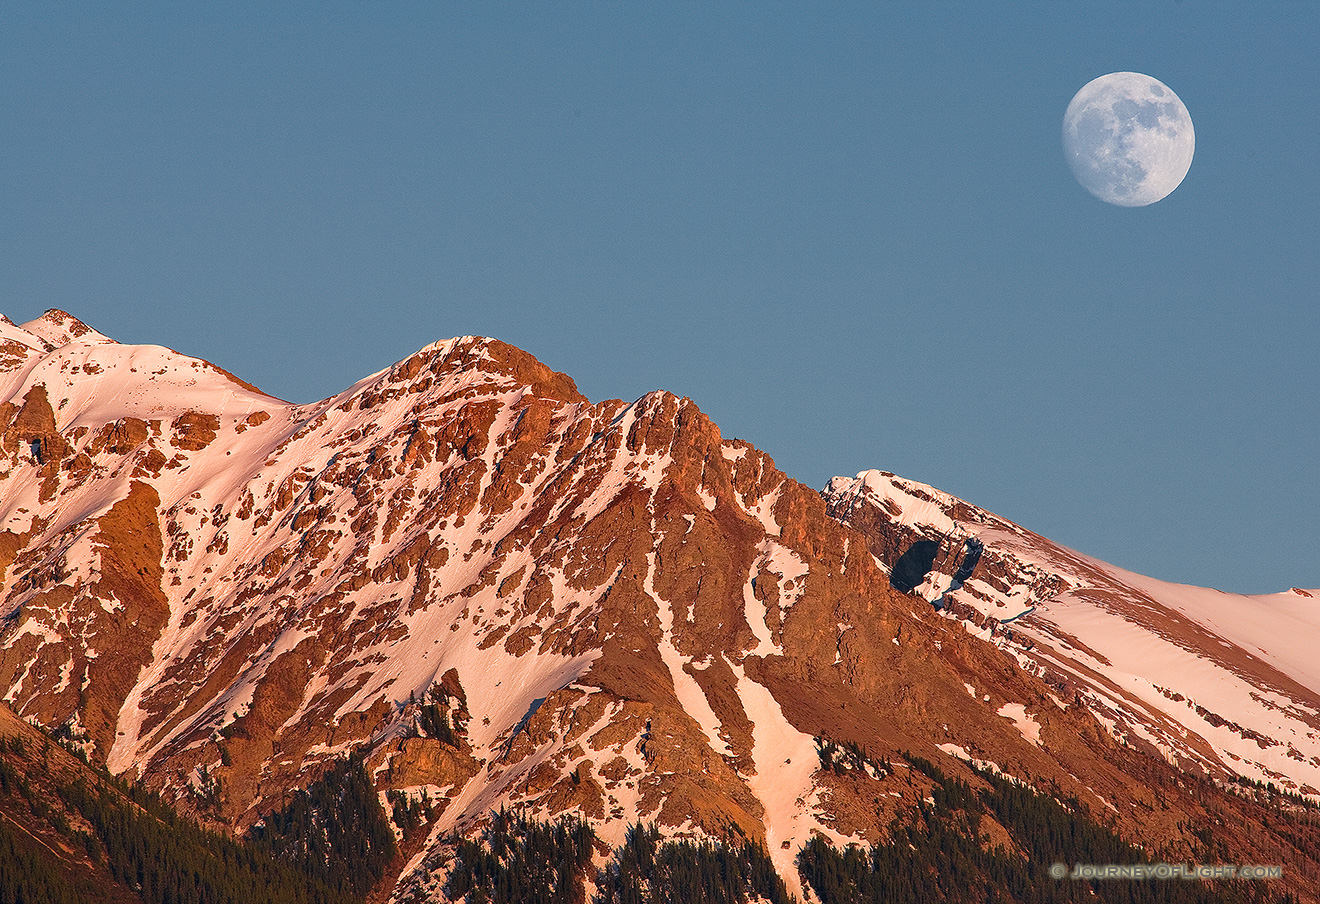 The moon rises over the peaks on the Kootenay Plains in Western Alberta. - Canada Picture